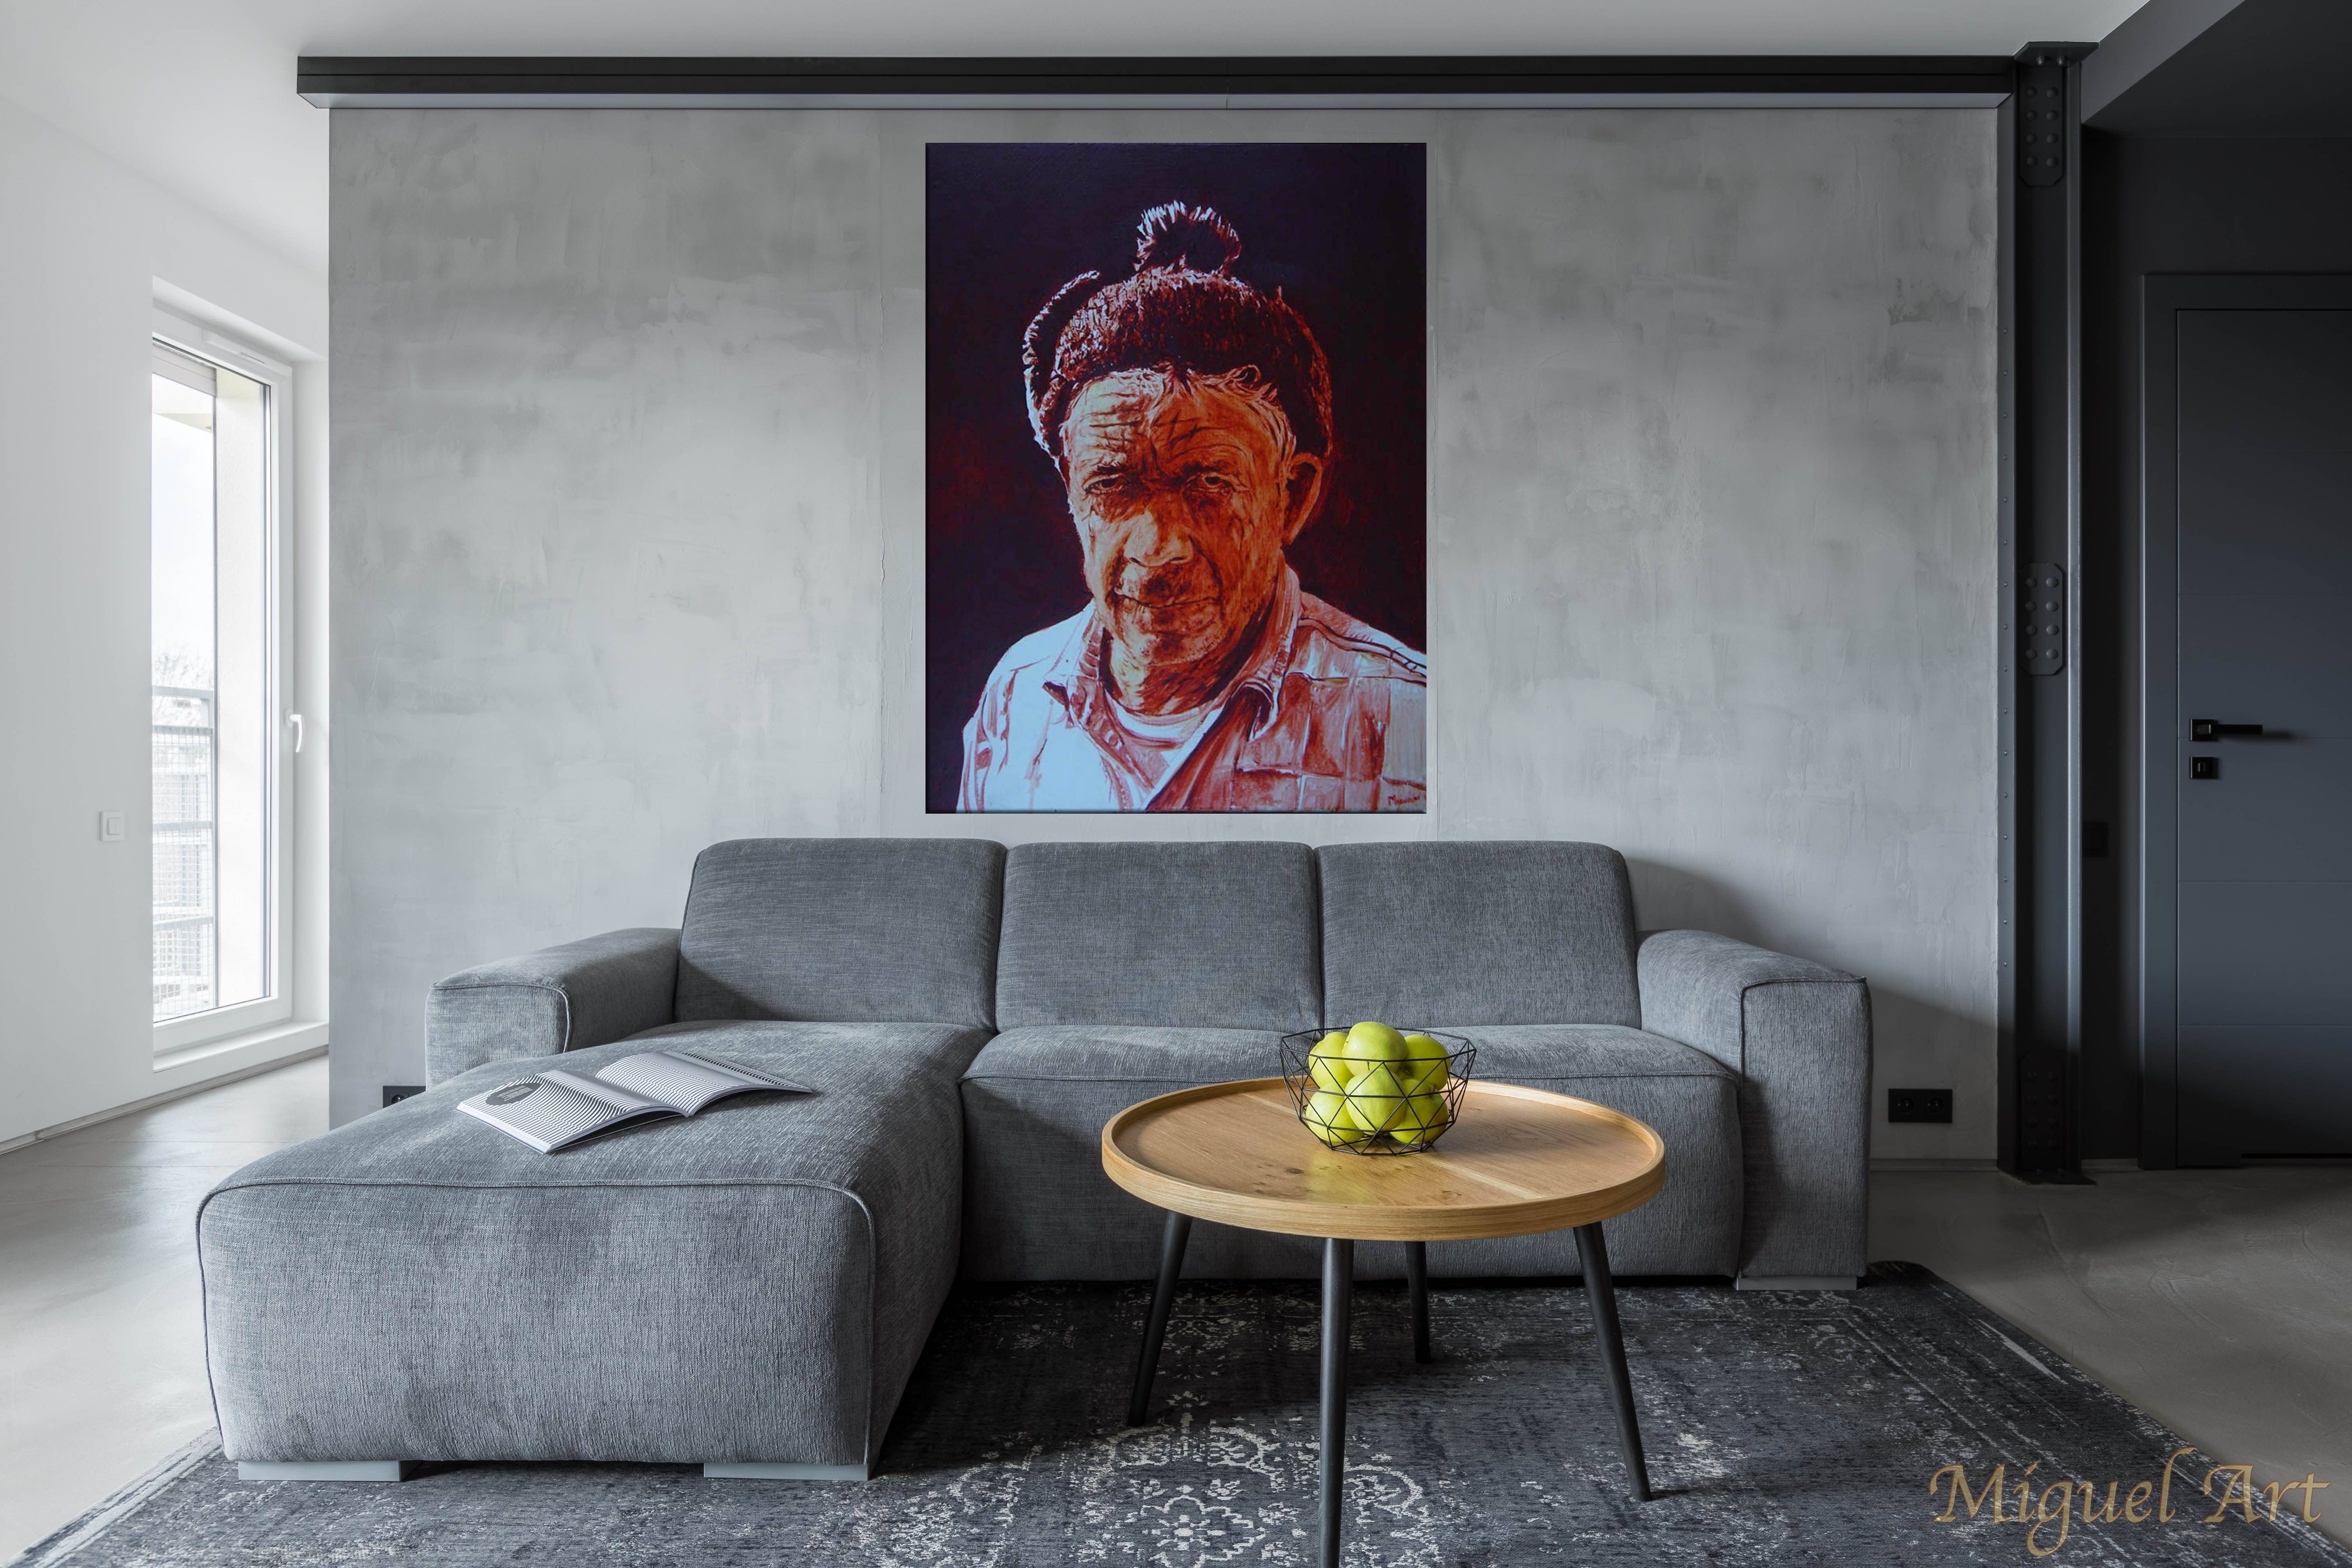 Painting of Santana displayed on the wall above a grey couch